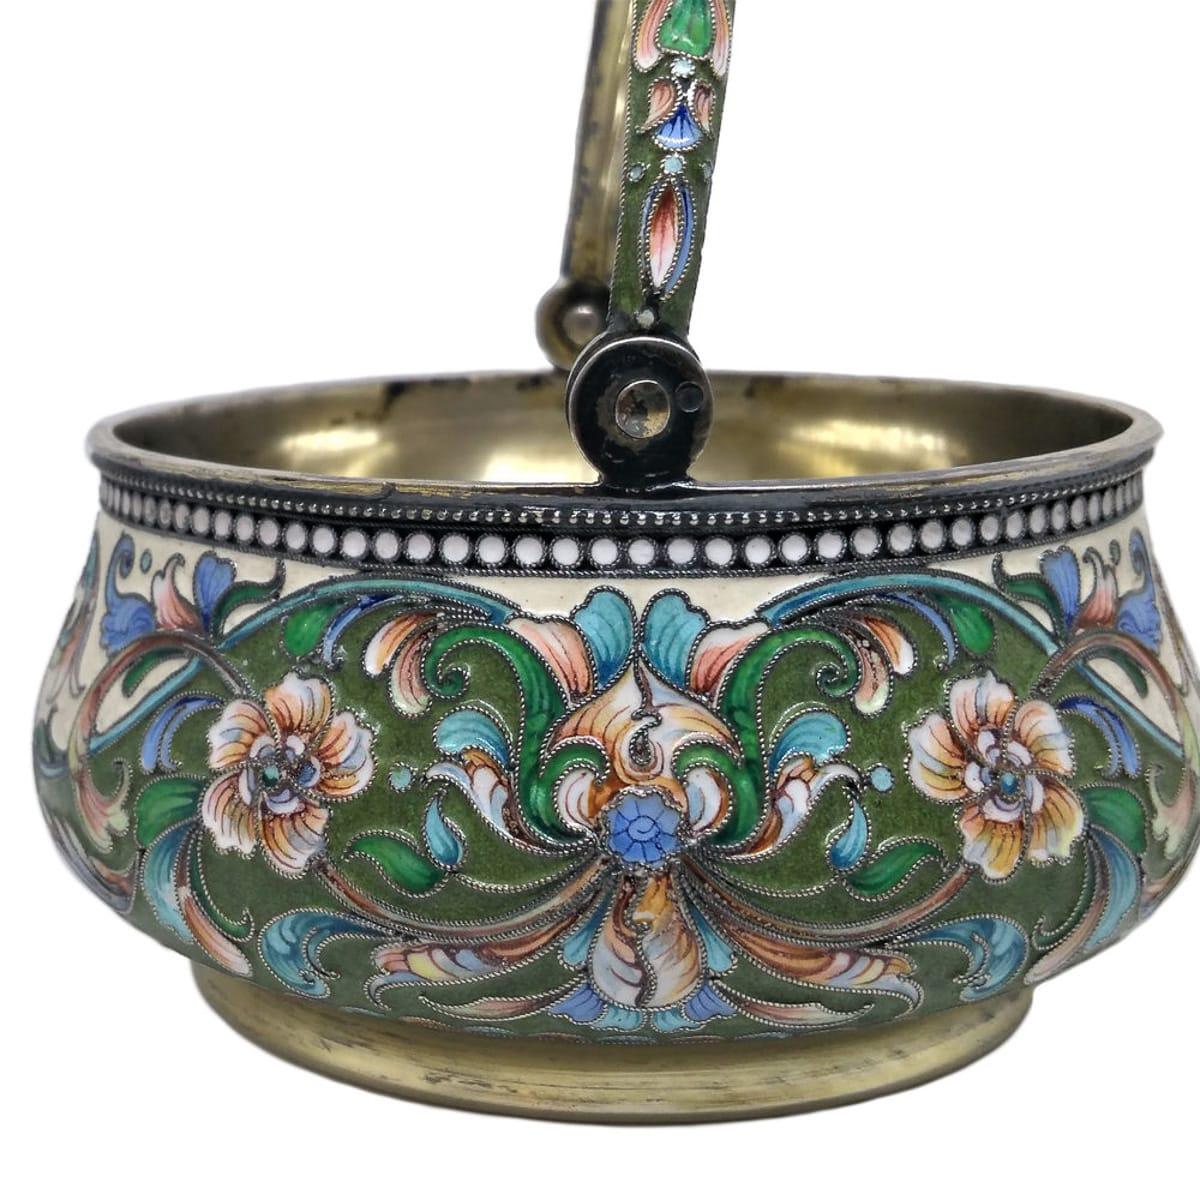 Antique early 20th century imperial Russian solid silver-gilt and cloisonné enamel sugar basket, of fine quality, richly gilt and beautifully enameled with multicolored stylized floral design on cream ground and applied with a swing handle.